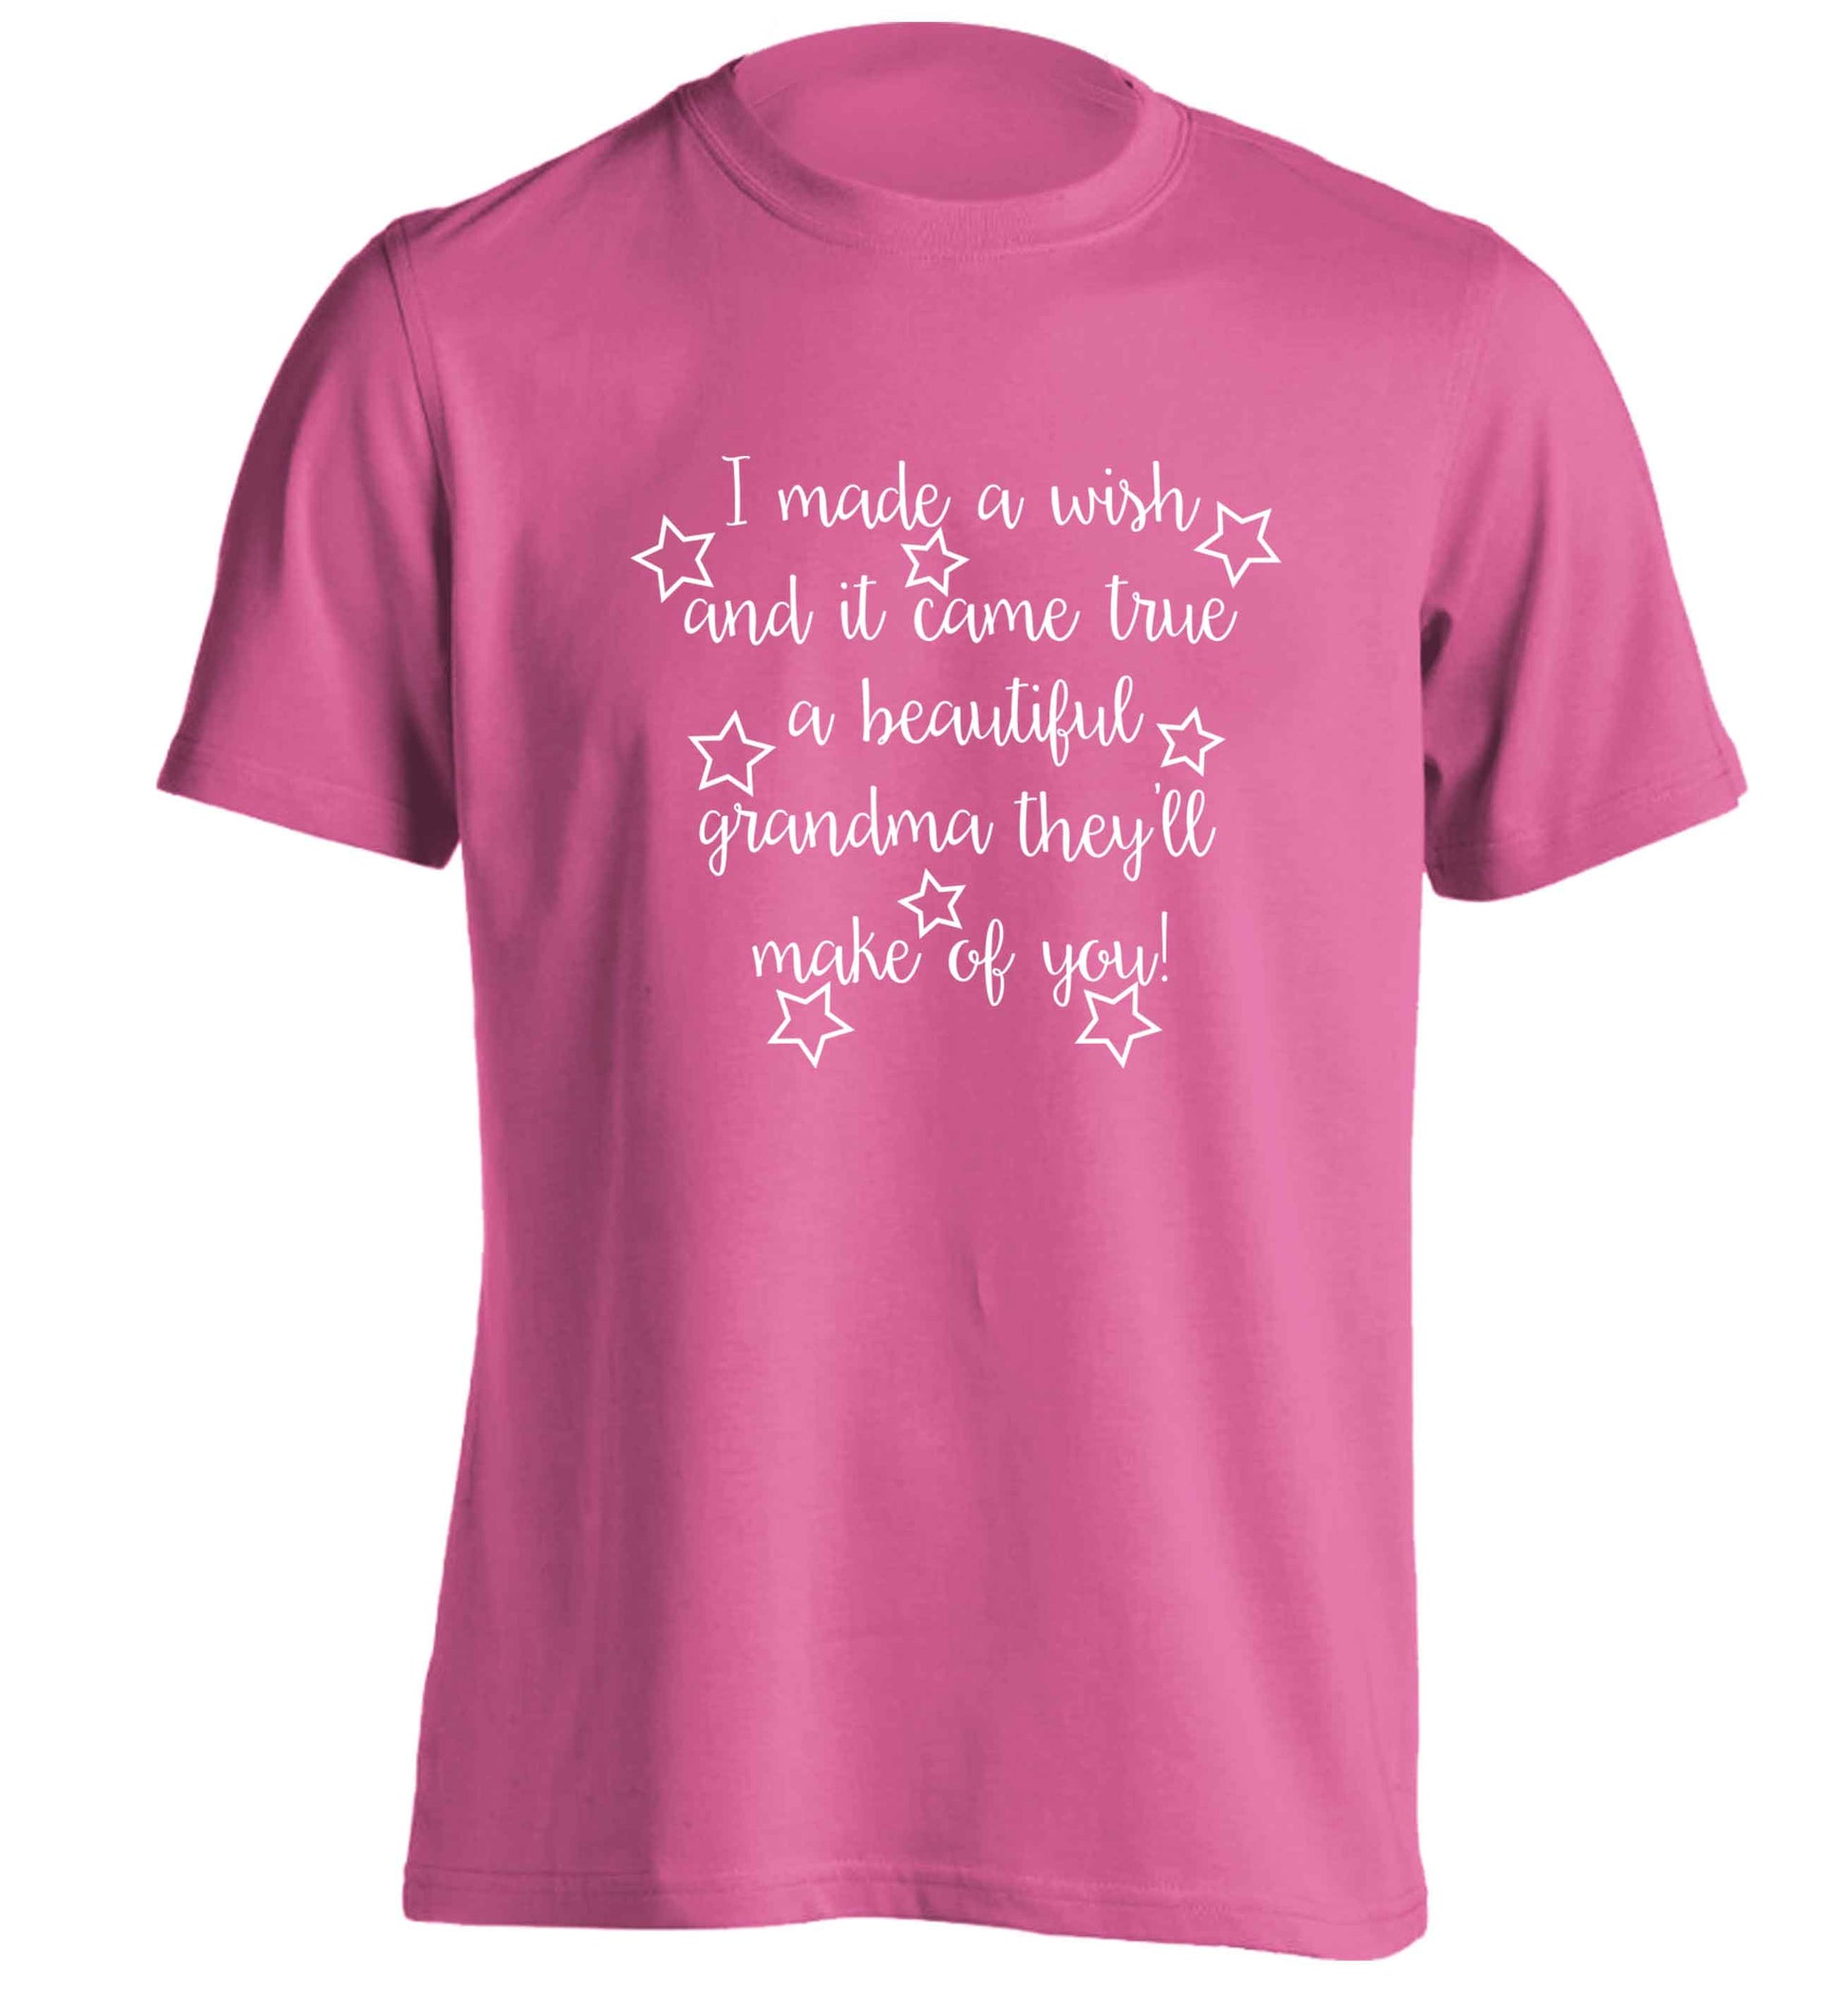 I made a wish and it came true a beautiful grandma they'll make of you! adults unisex pink Tshirt 2XL